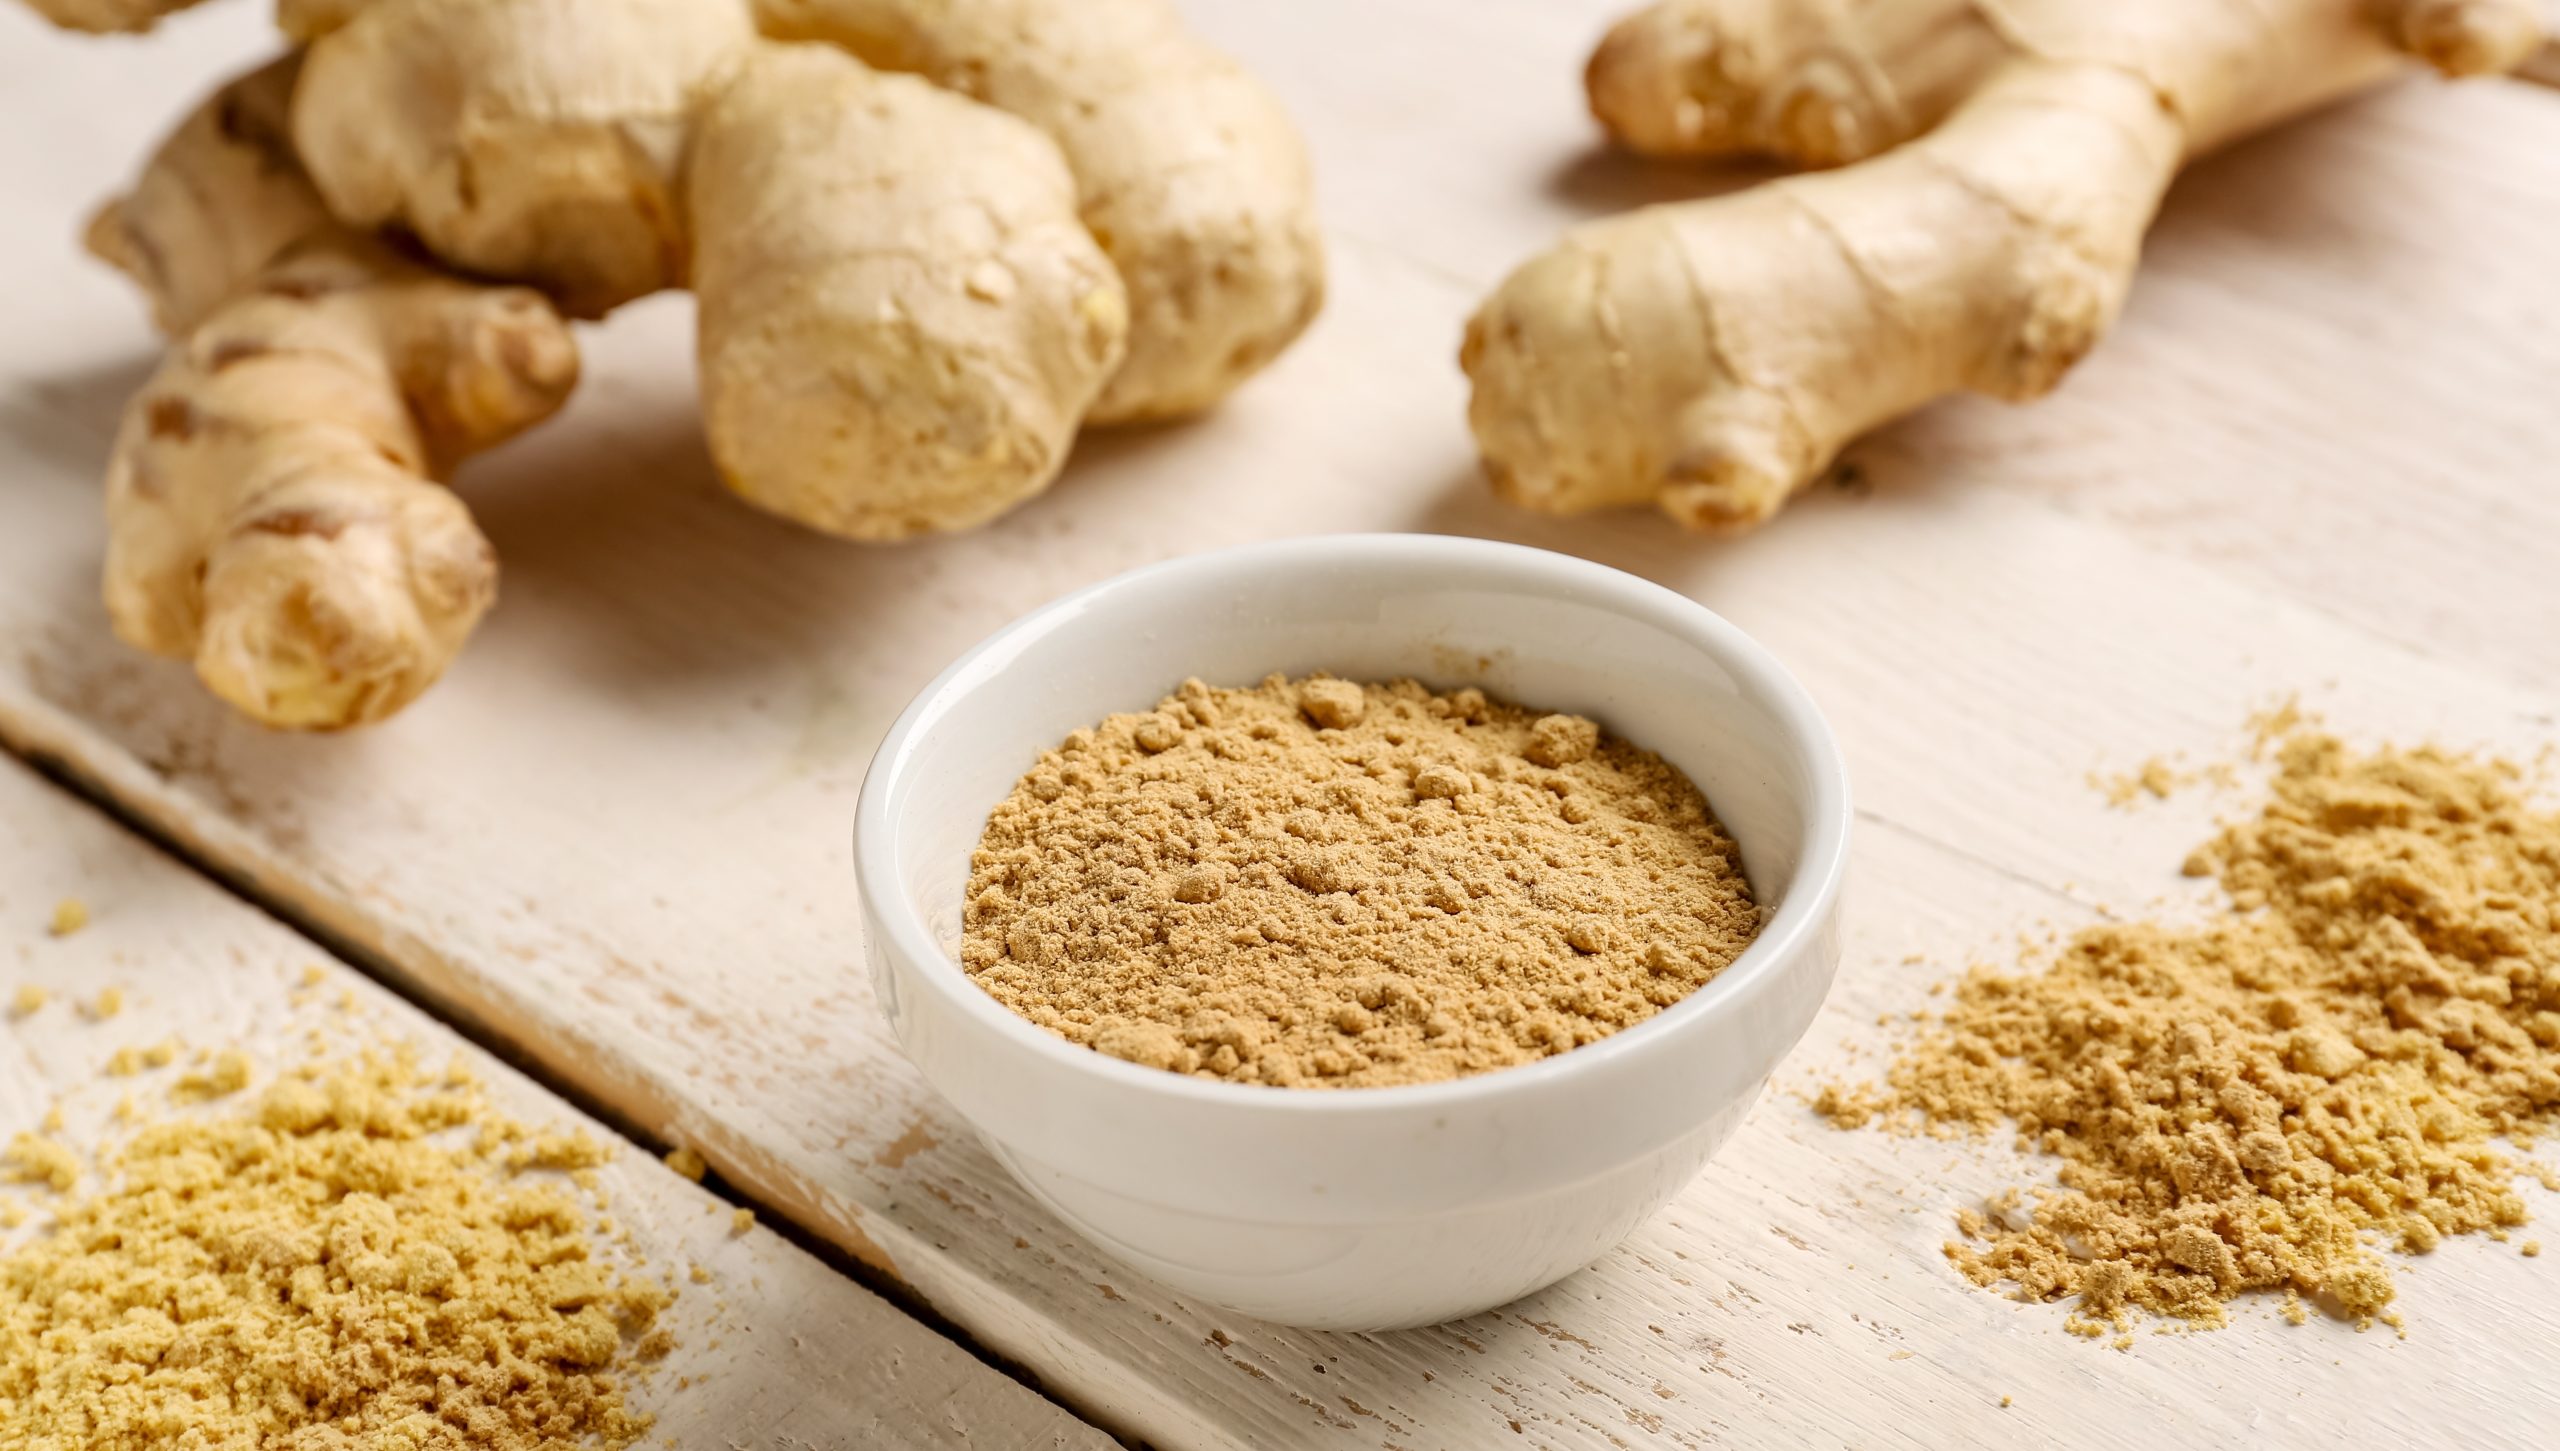 Ginger is a great anti-inflammatory nutrient